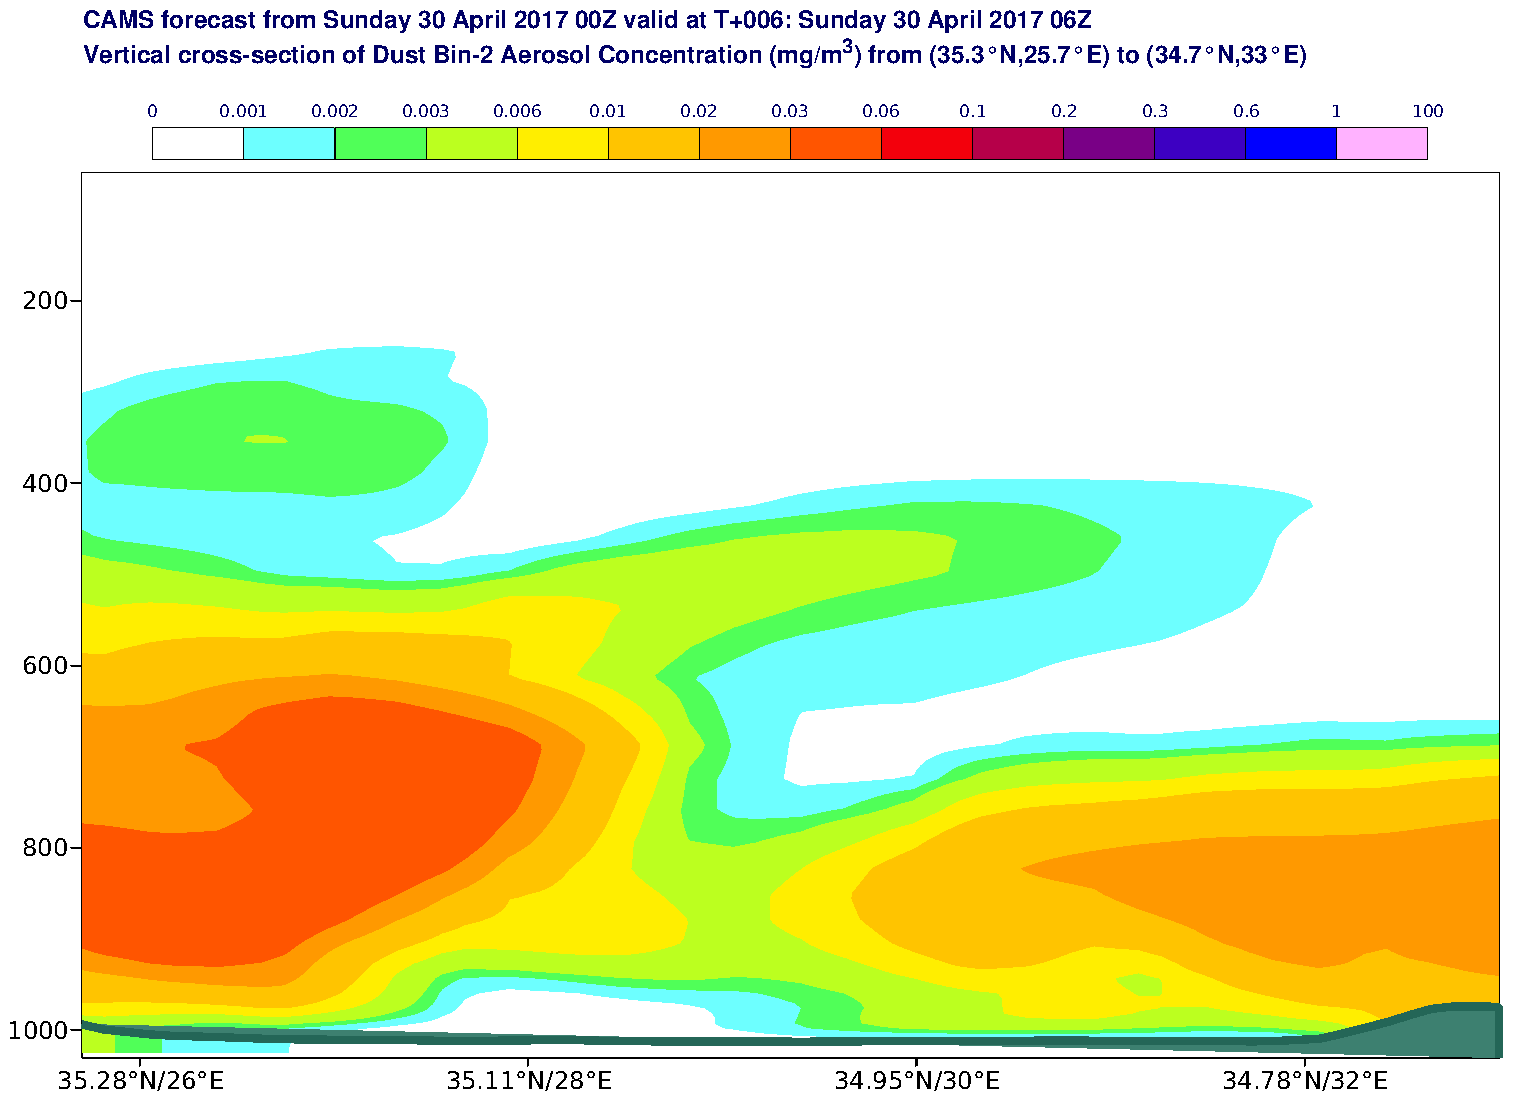 Vertical cross-section of Dust Bin-2 Aerosol Concentration (mg/m3) valid at T6 - 2017-04-30 06:00